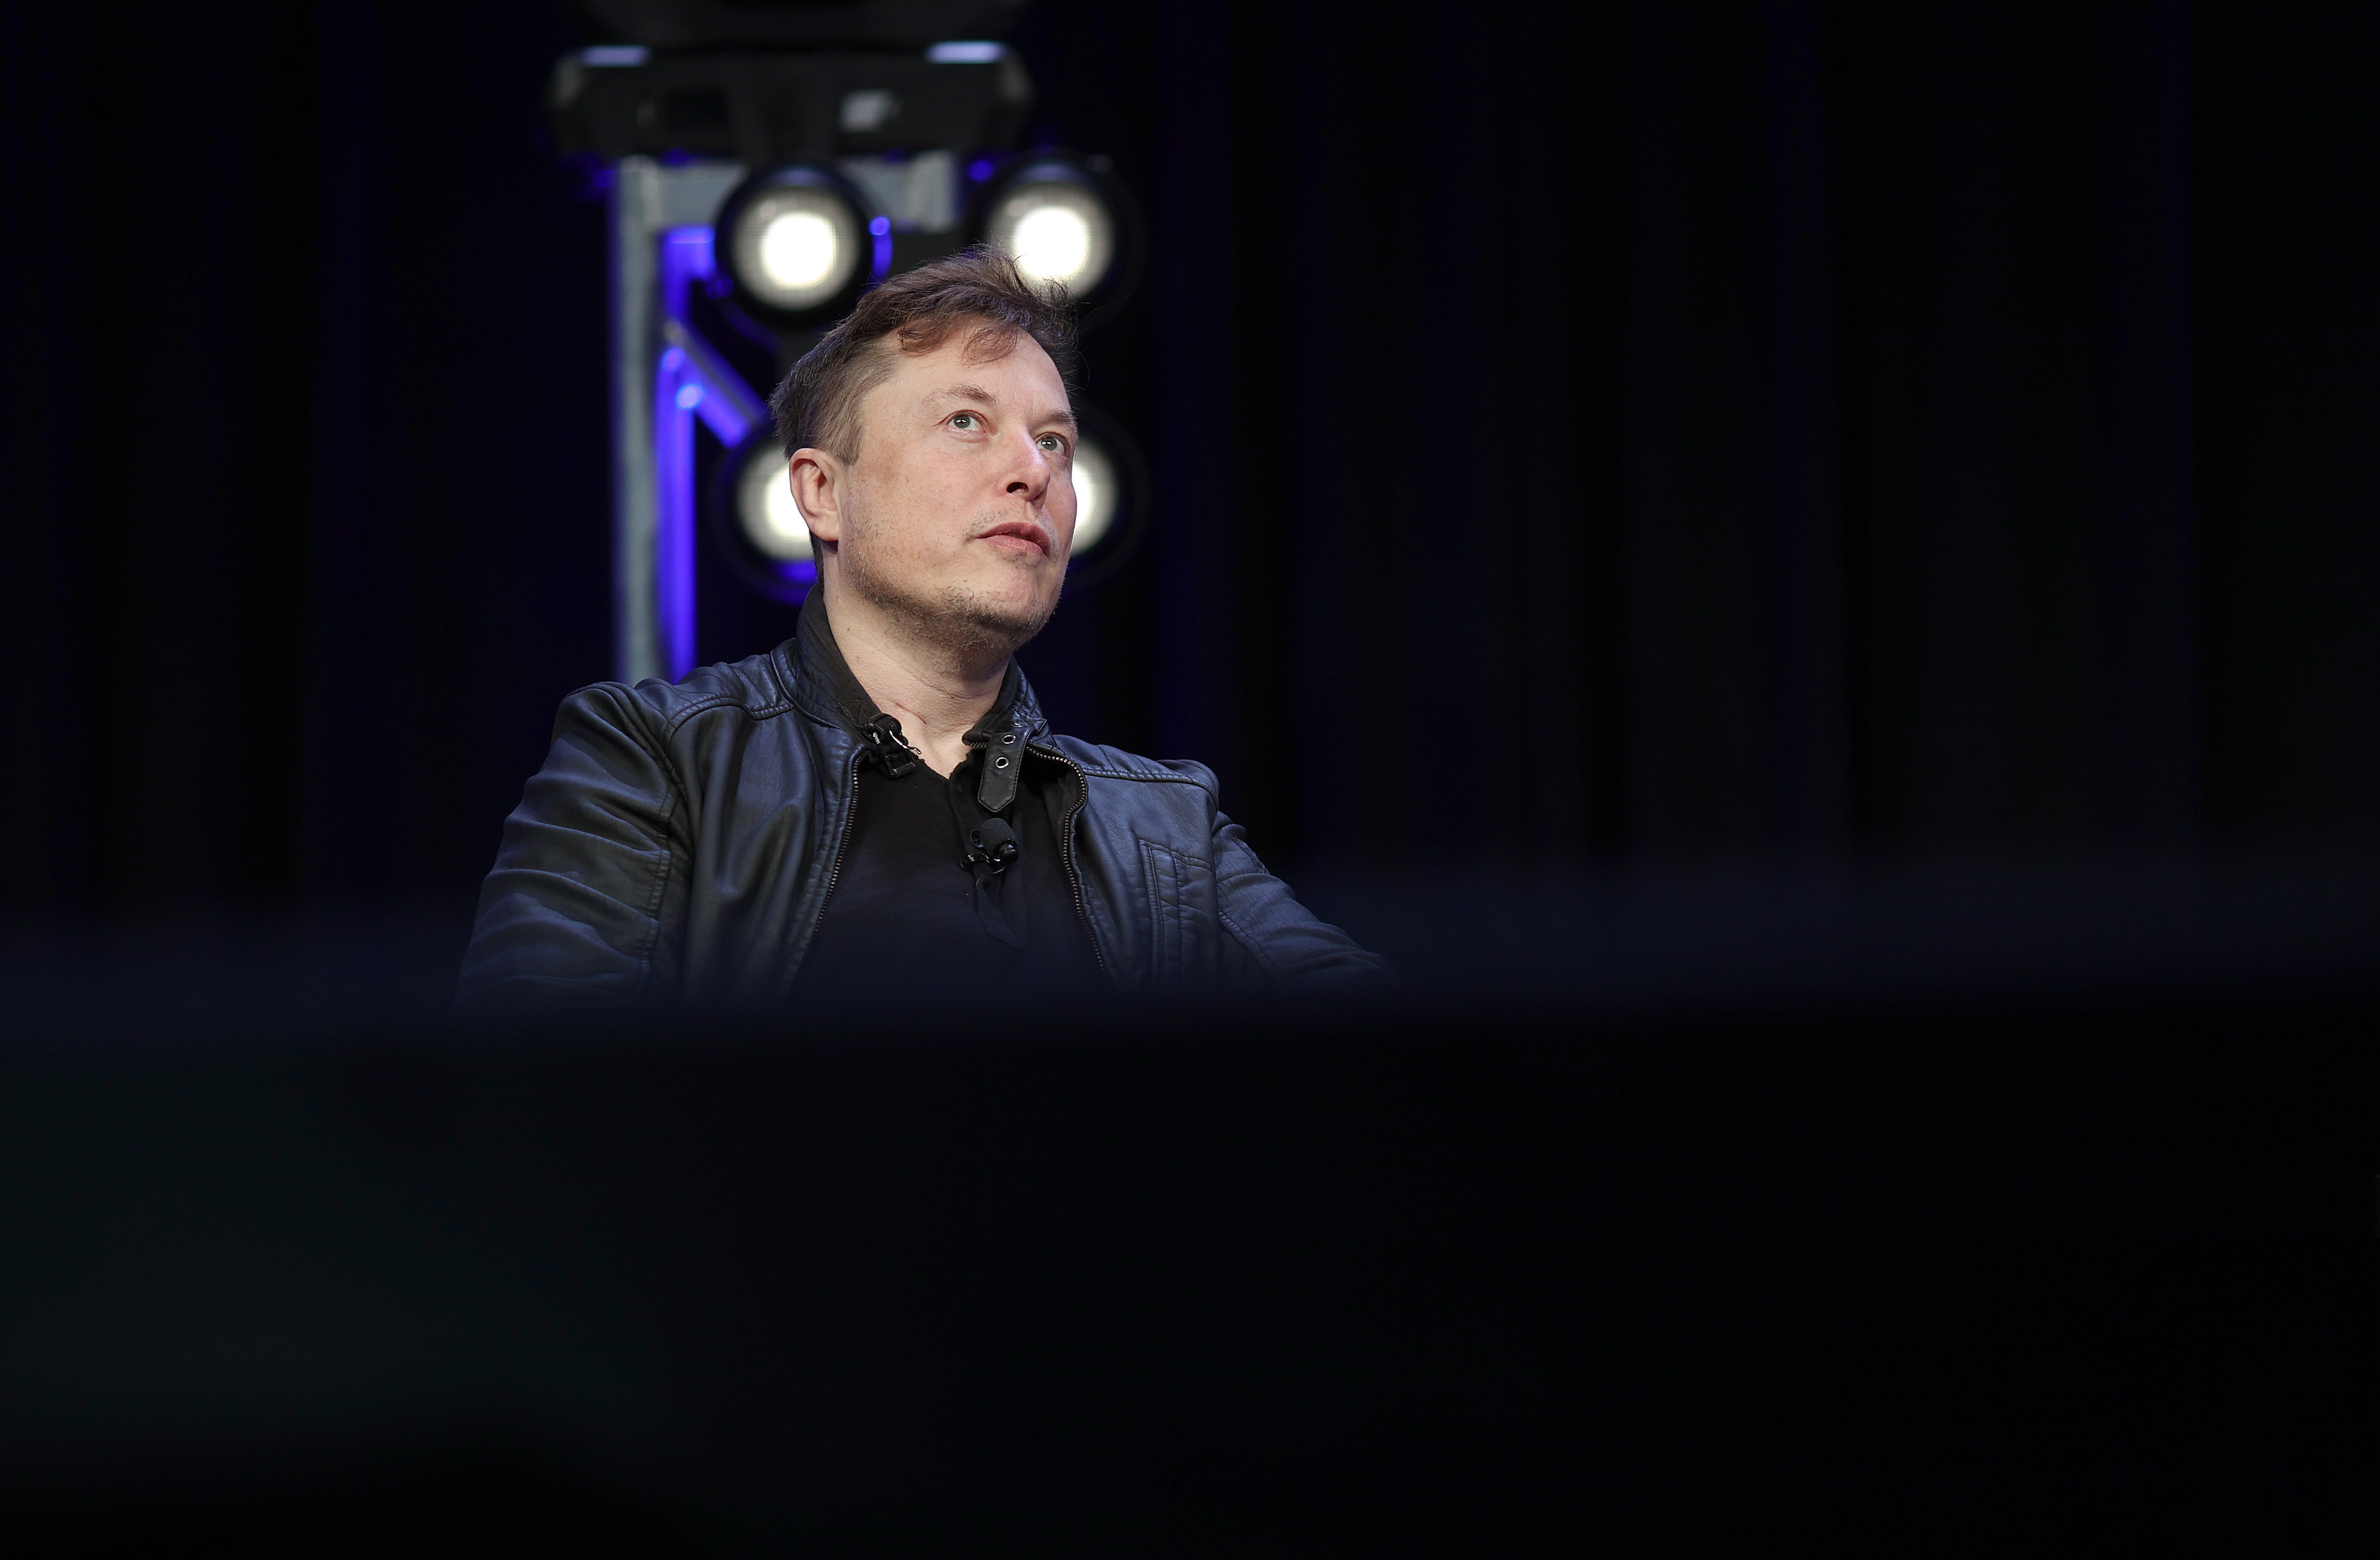 Tesla CEO Elon Musk attends the 2020 Satellite Conference and Exhibition in Washington on March 9.